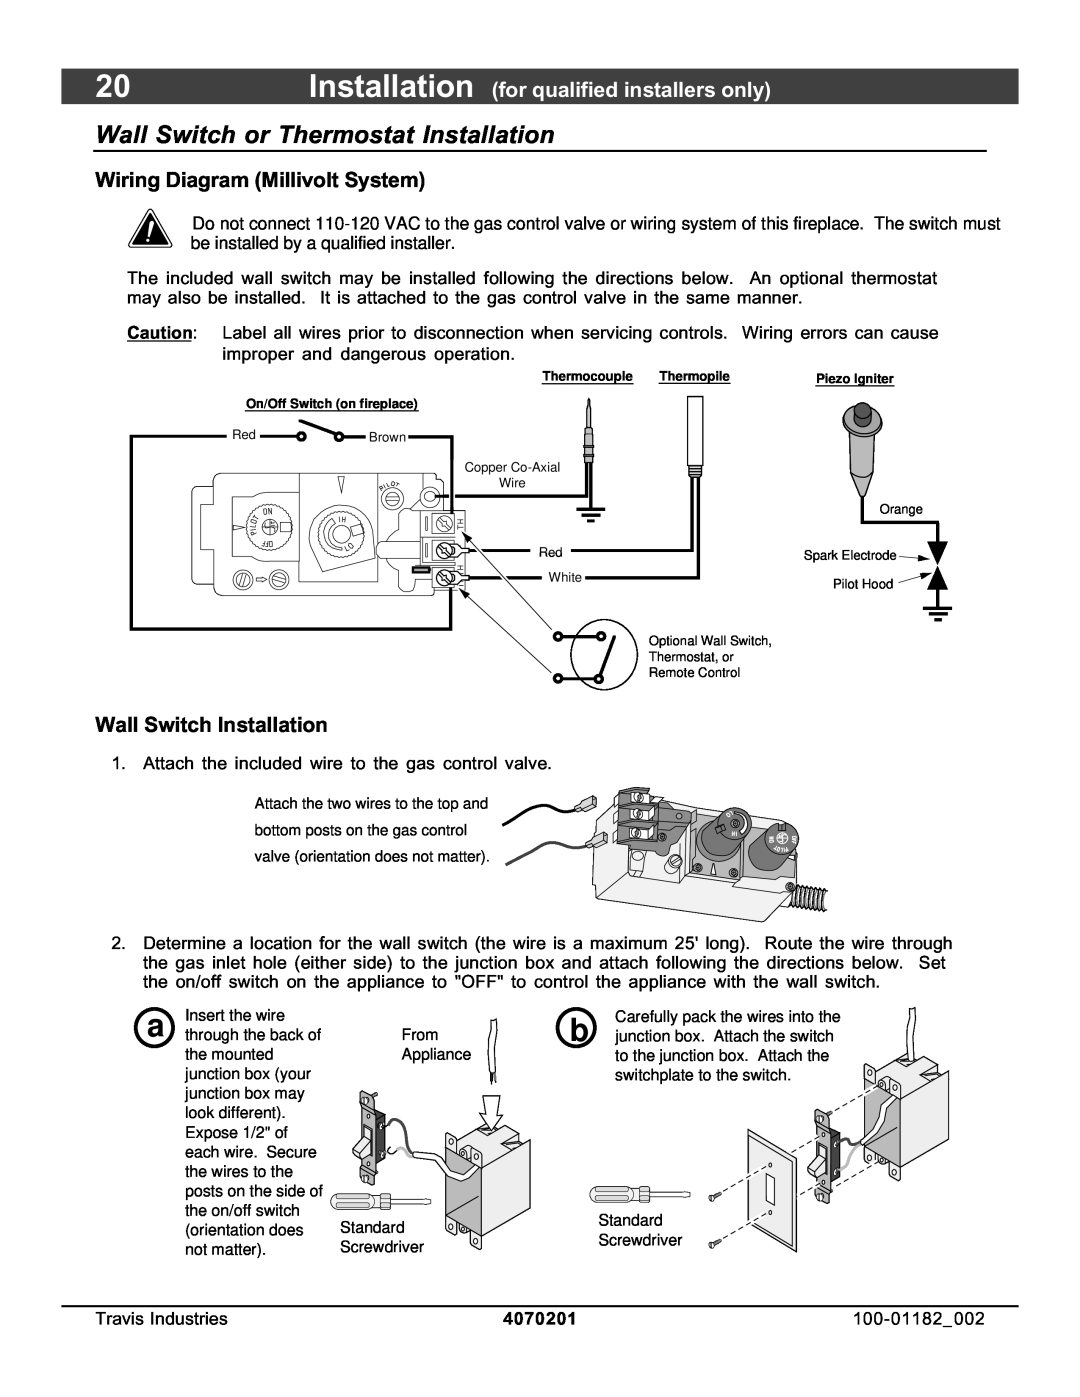 North Star 864 HH Wall Switch or Thermostat Installation, Wiring Diagram Millivolt System, Wall Switch Installation 